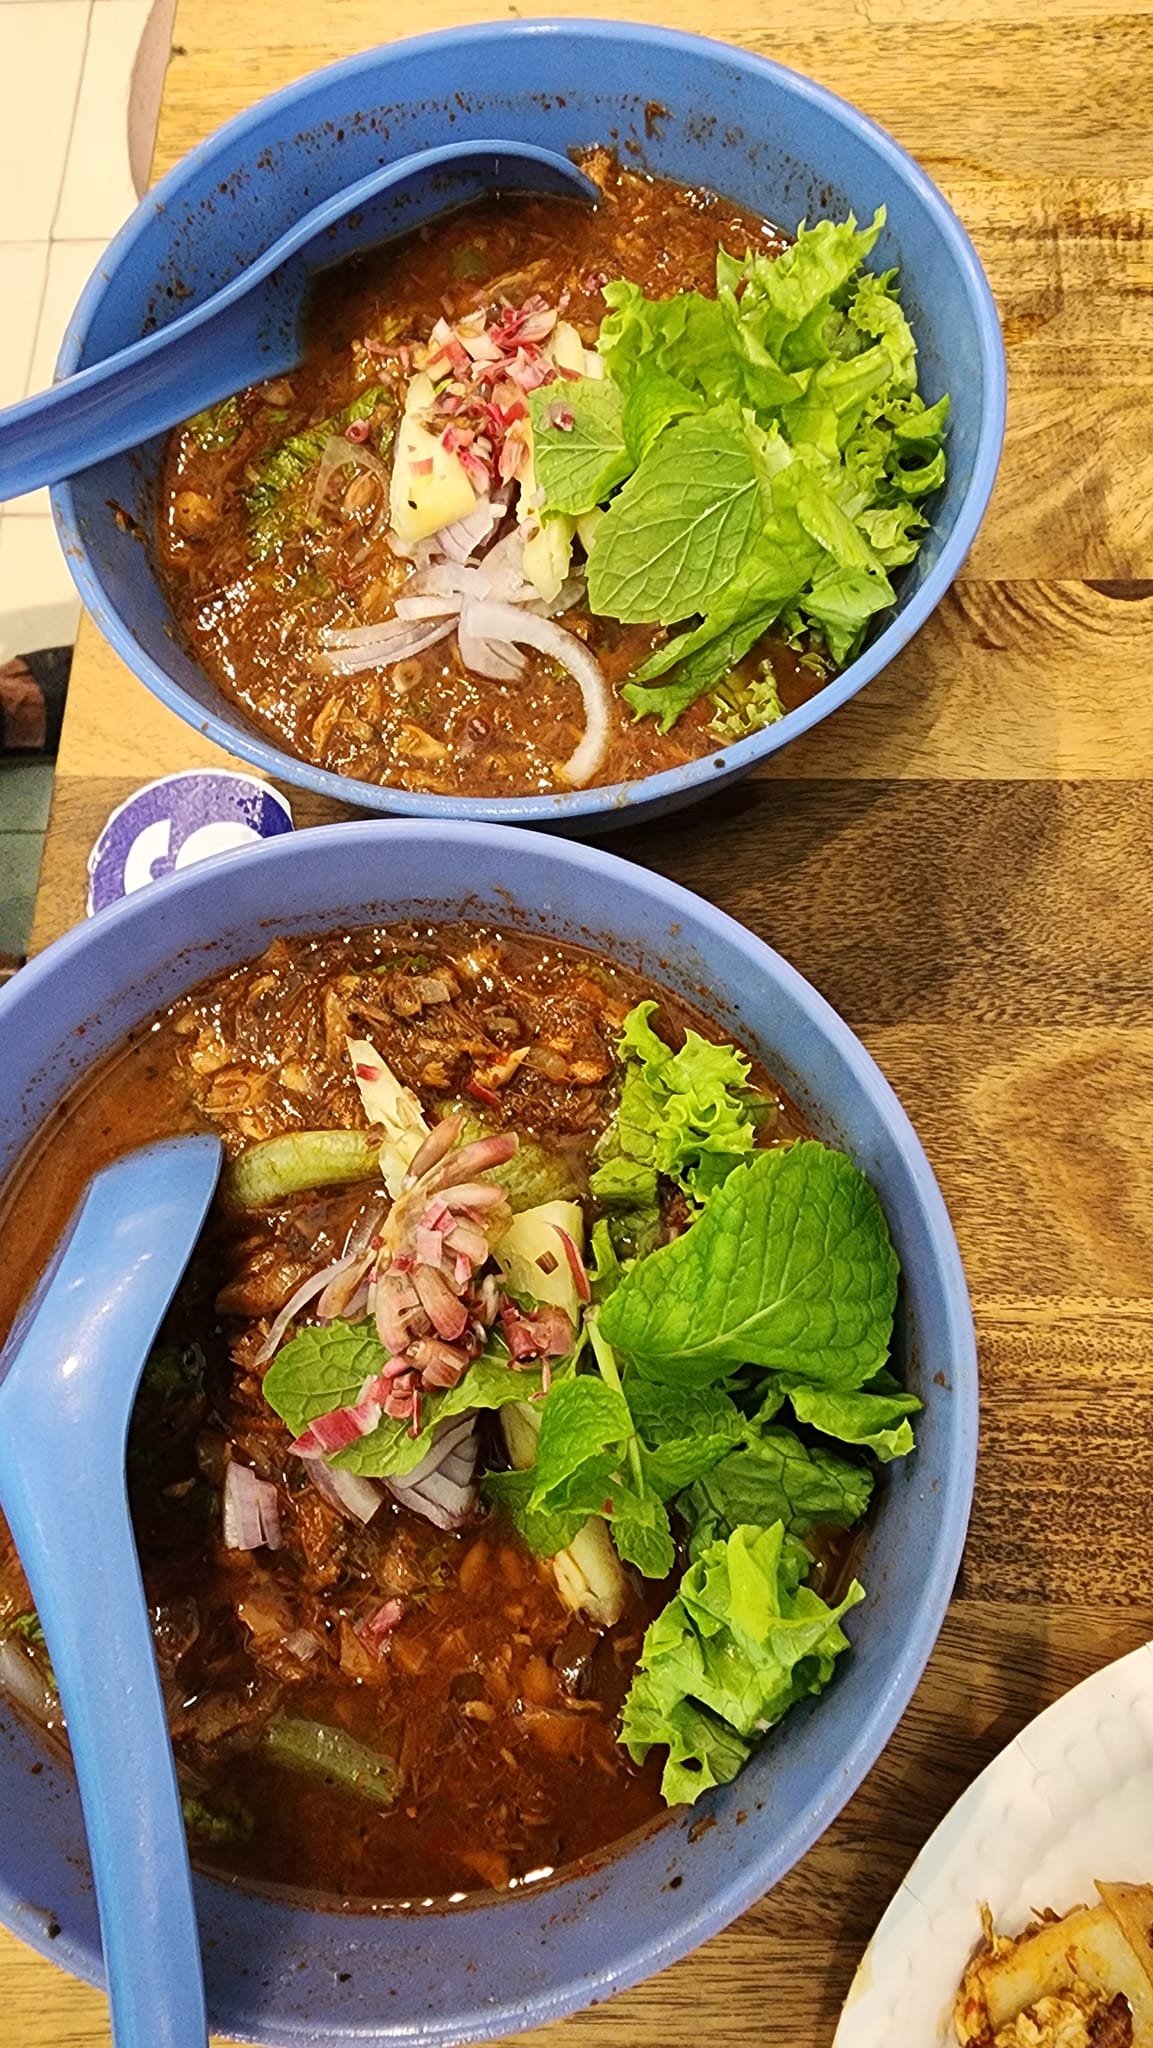 Penang Road Famous Laksa is Michelin Rated